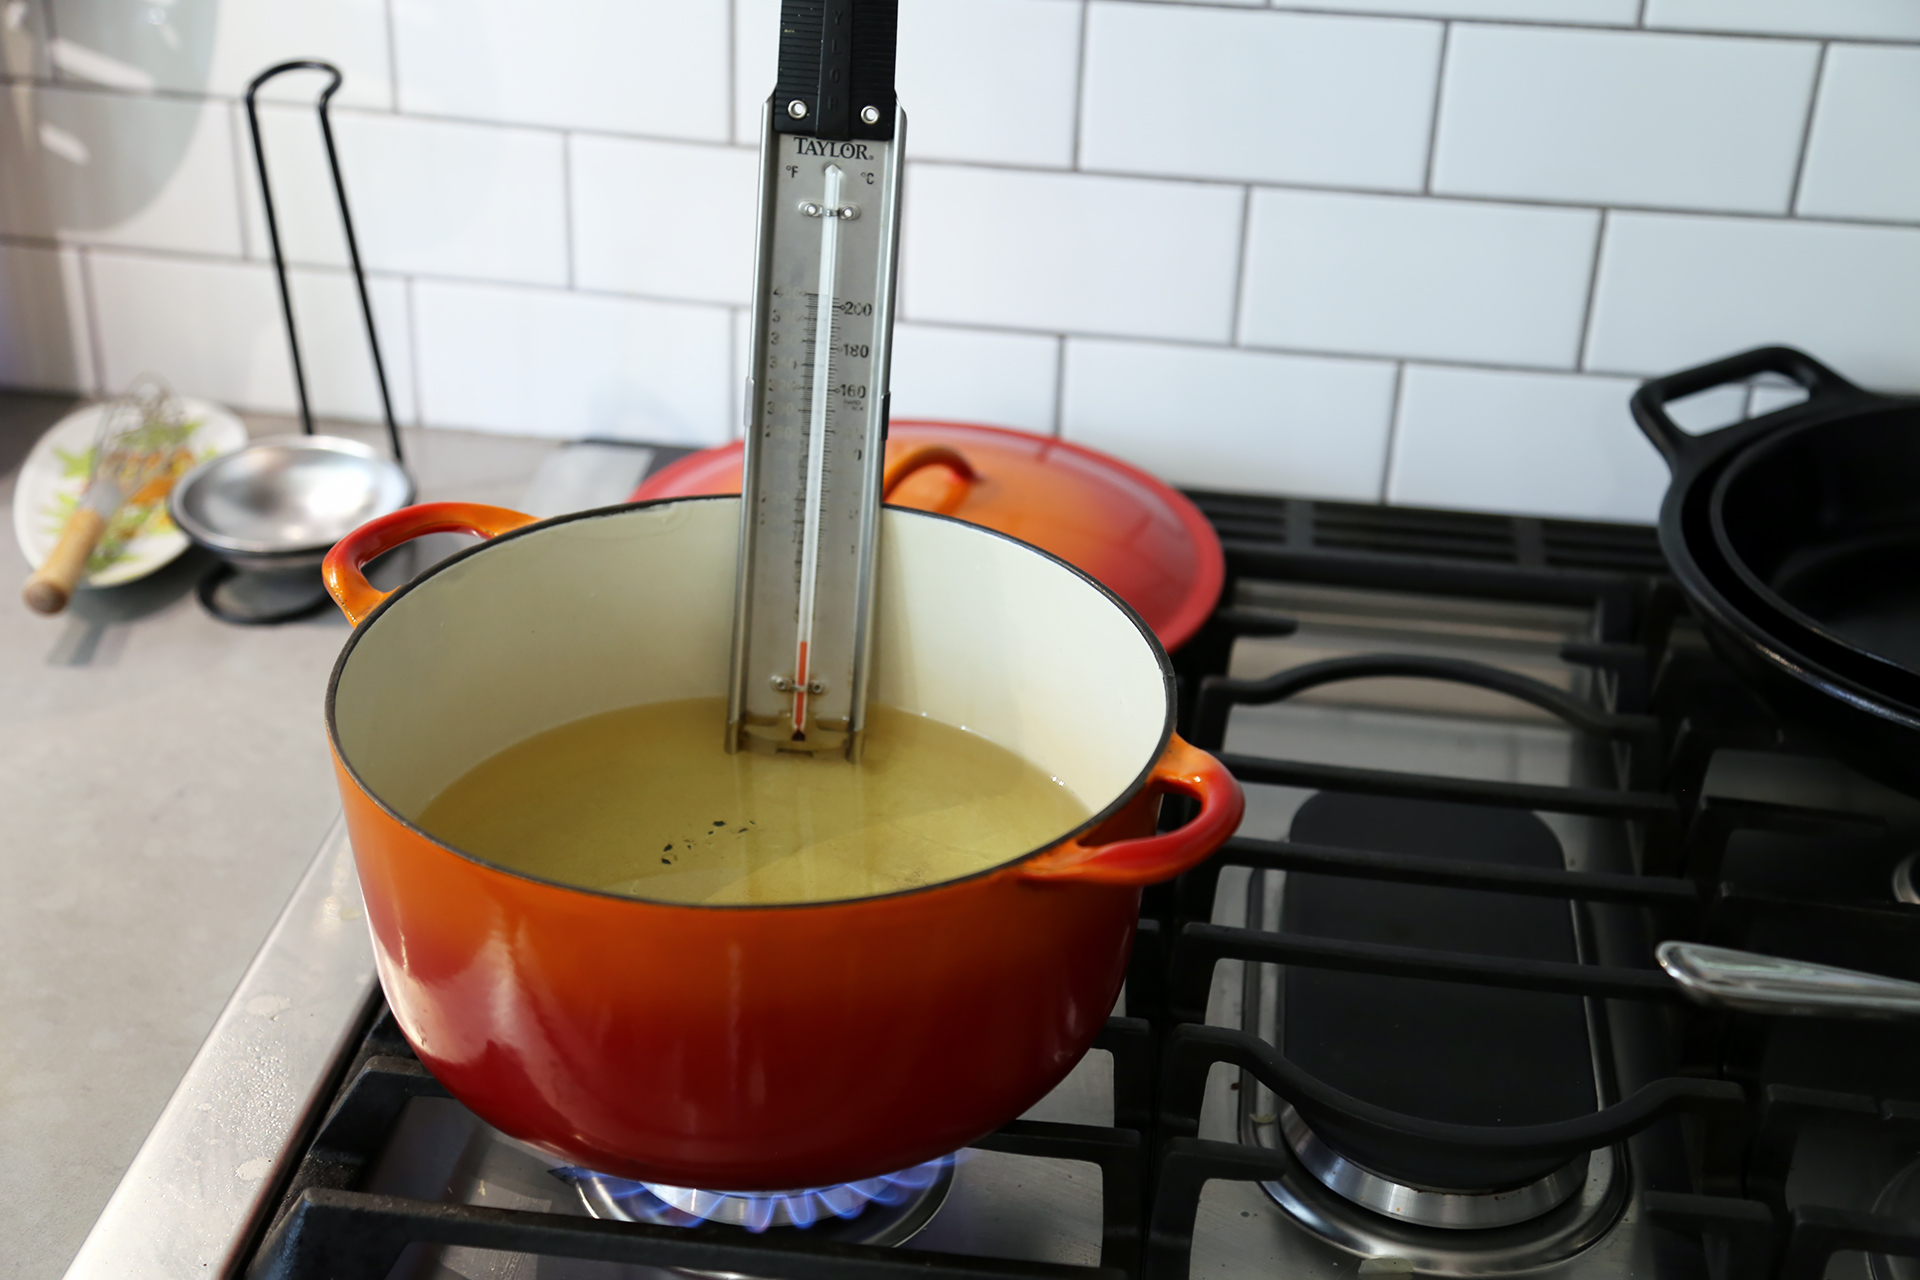 Fill a Dutch oven or large, wide saucepan half full with the oil and heat over medium-high heat to 330F on a deep-fry or candy thermometer.